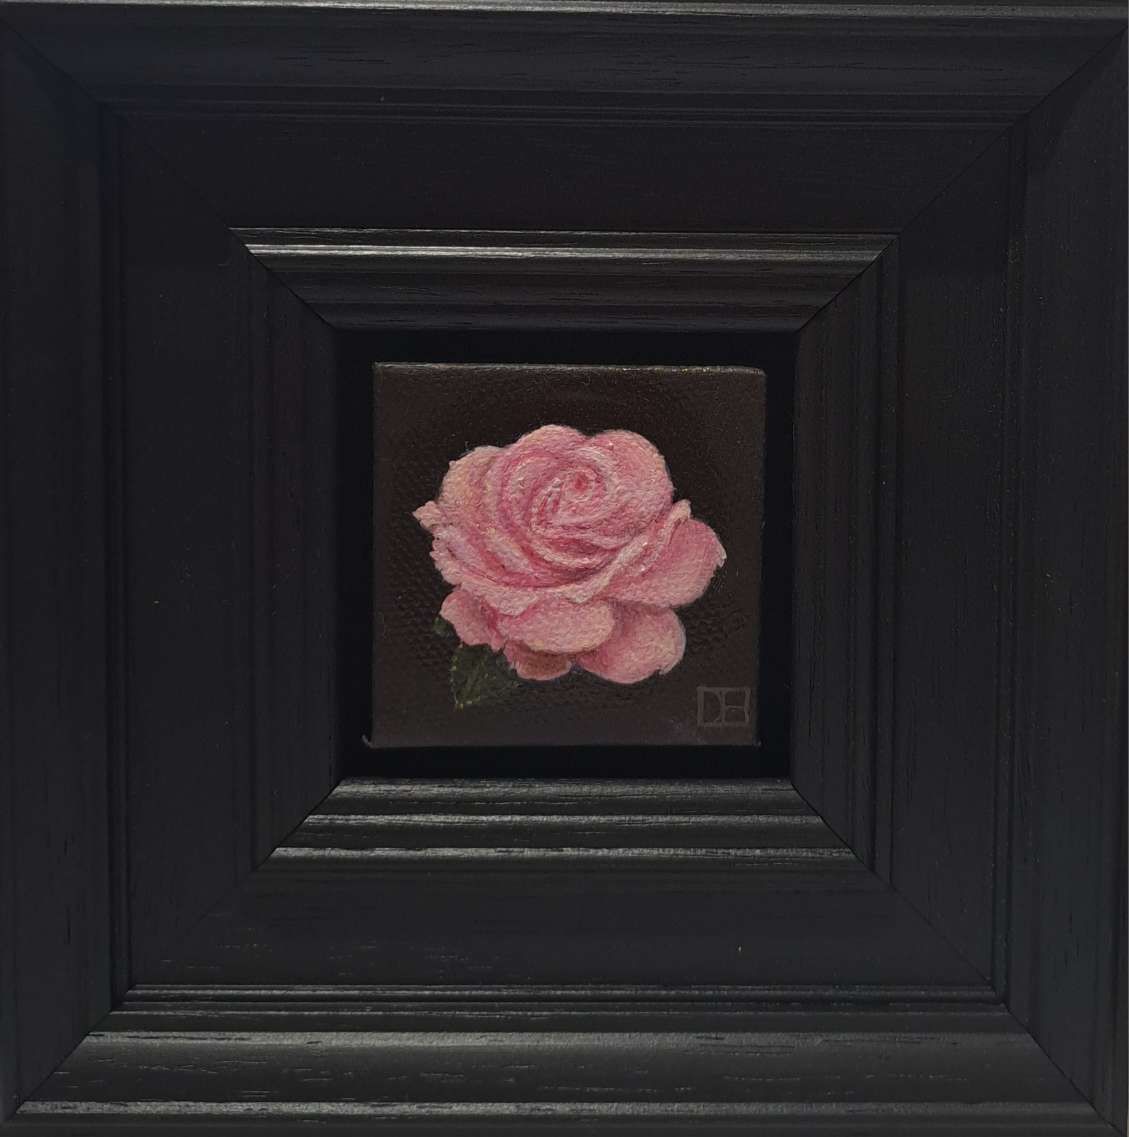 Pocket Pink Rose with Leaf by Dani Humberstone